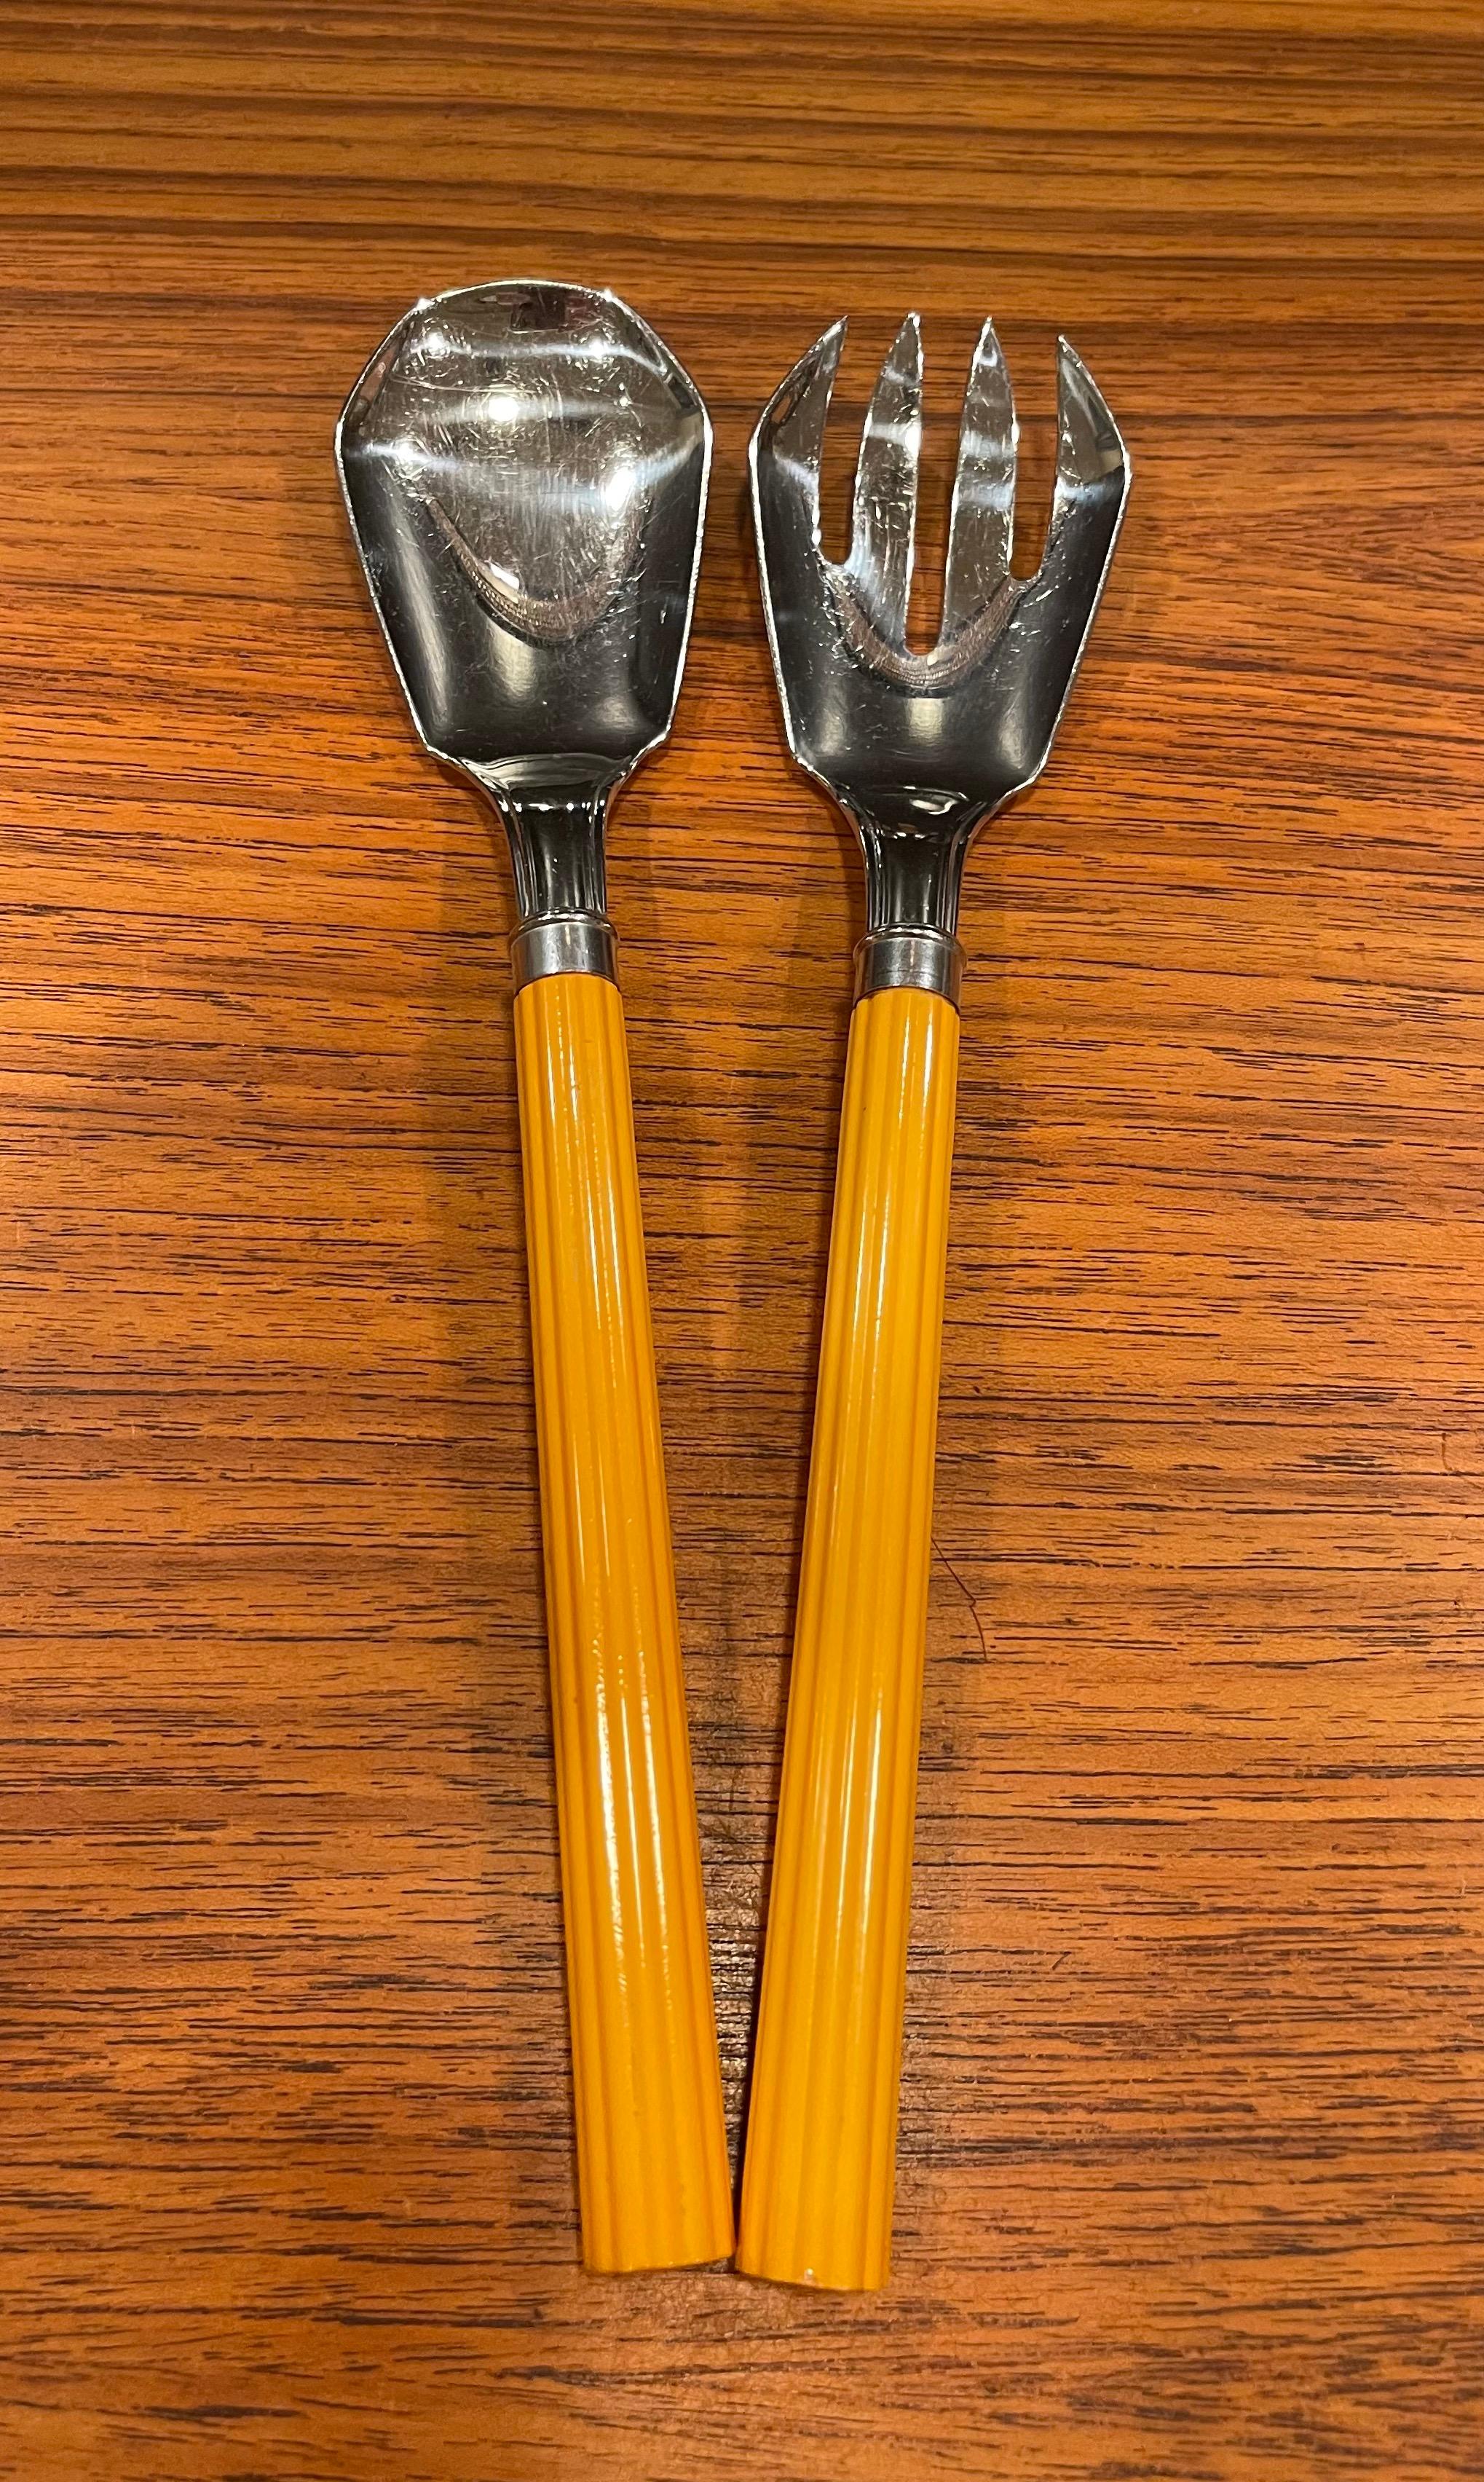 Bakelite & Stainless Steel Art Deco Salad Servers by Chase & Co. 2